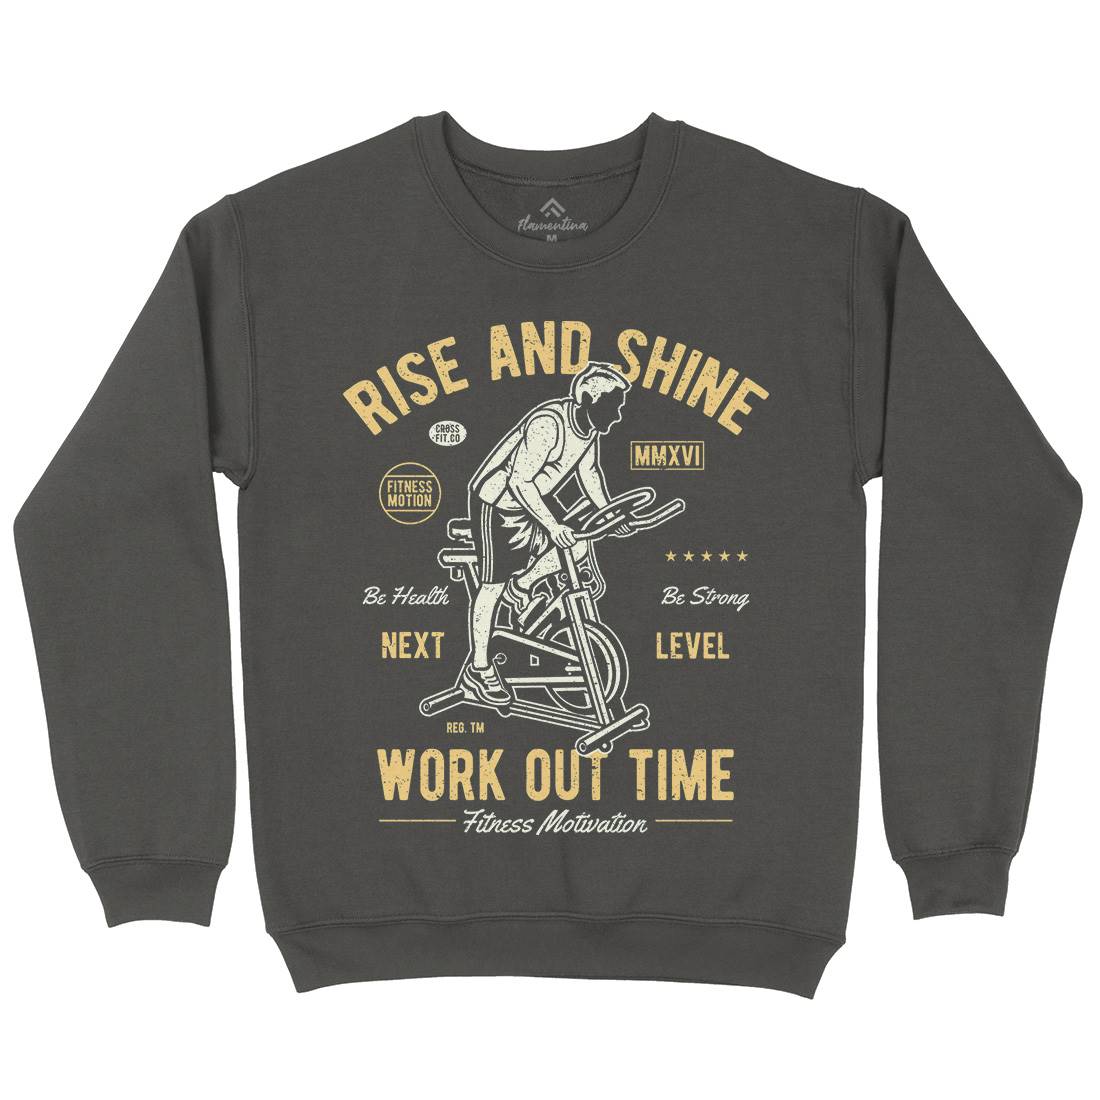 Work Out Time Mens Crew Neck Sweatshirt Gym A199